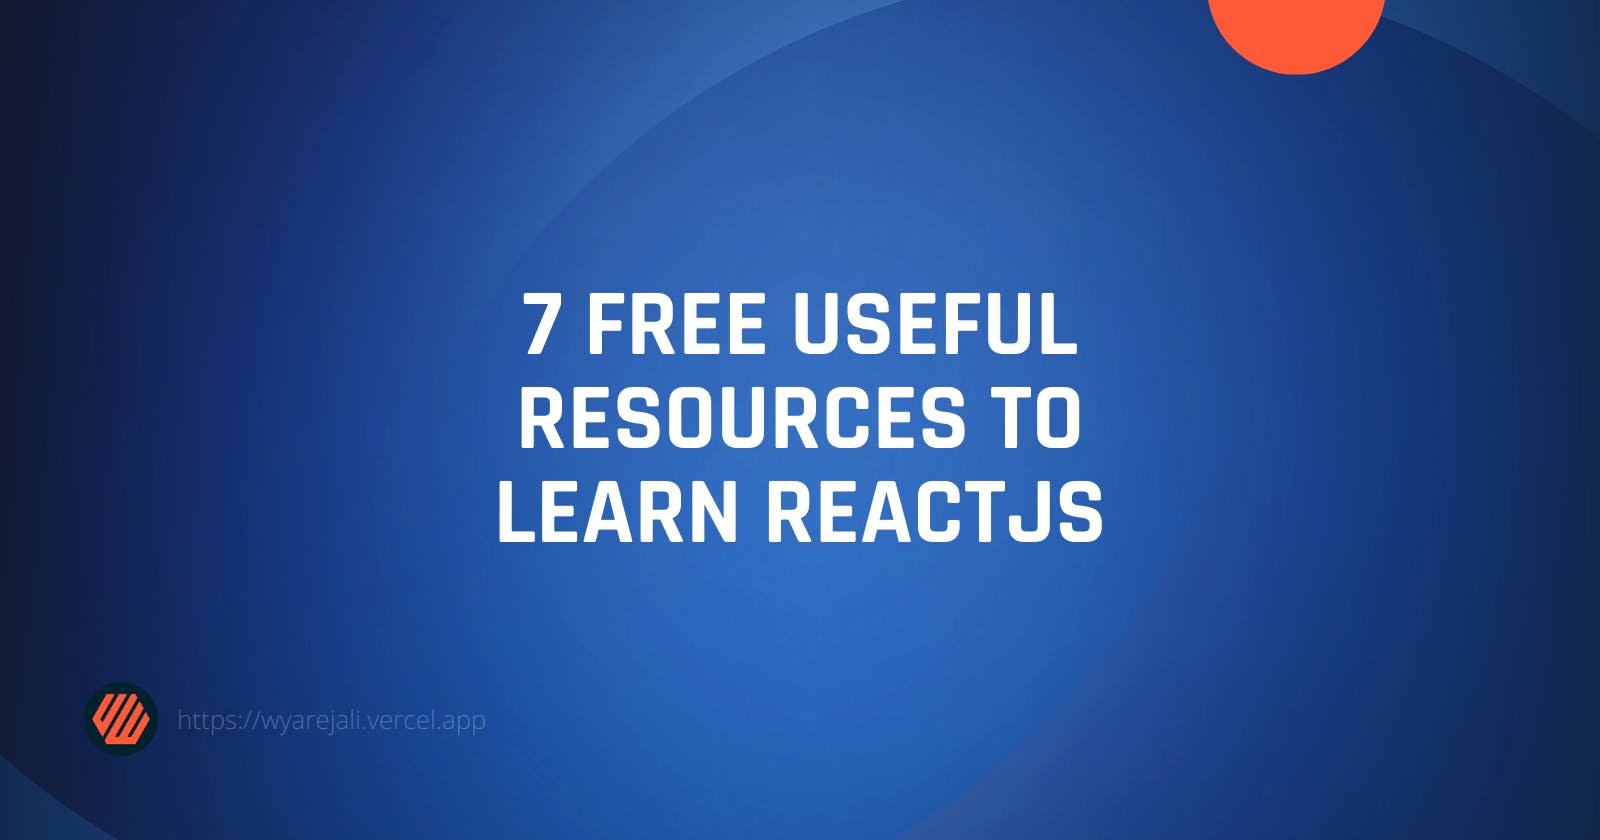 7 Free Useful Resources to Learn ReactJS